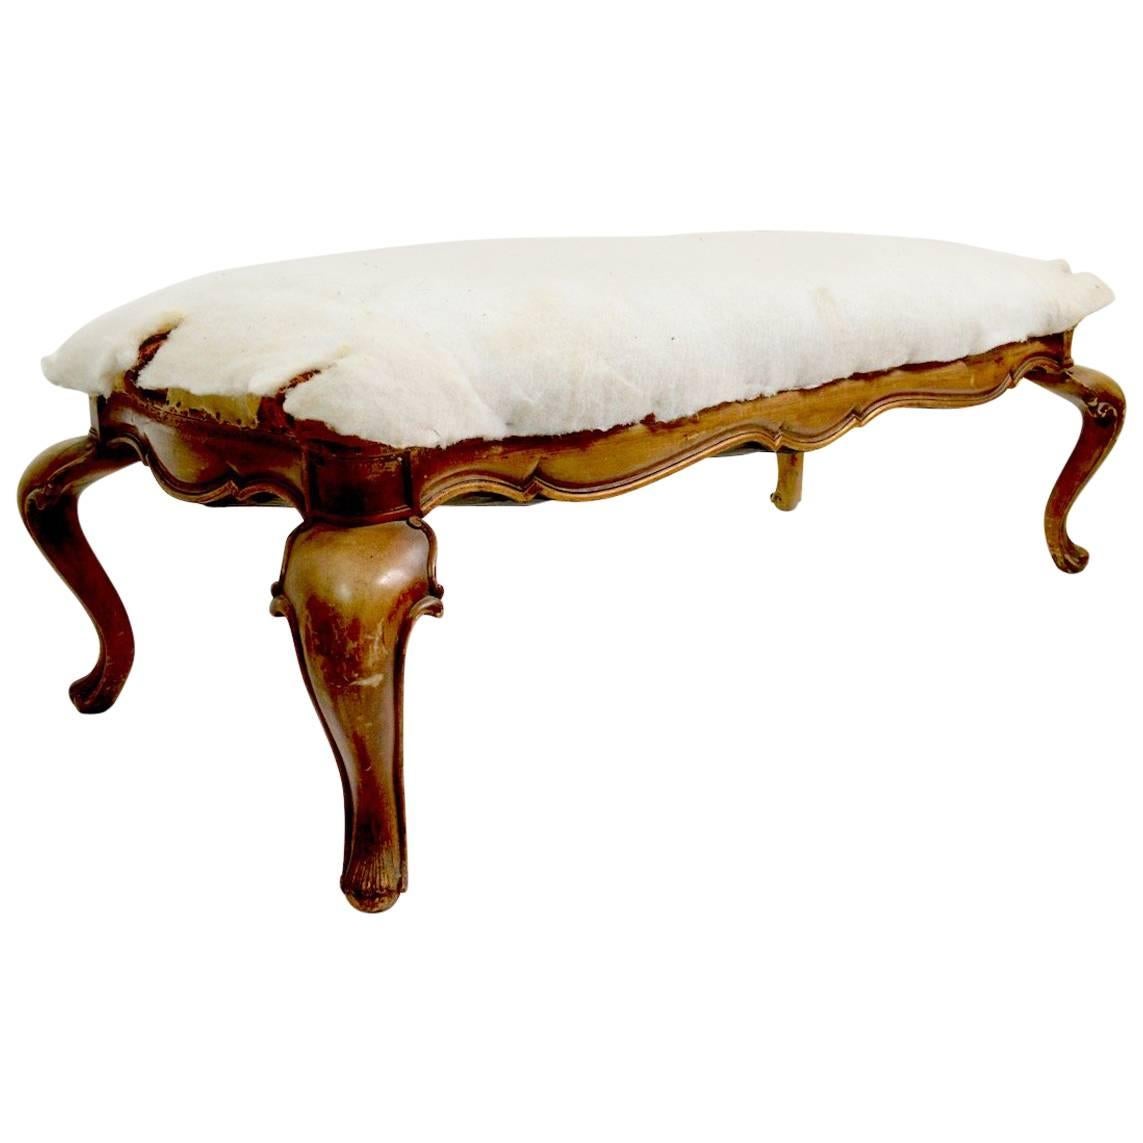 Carved Wood Bench with Cabriole Legs